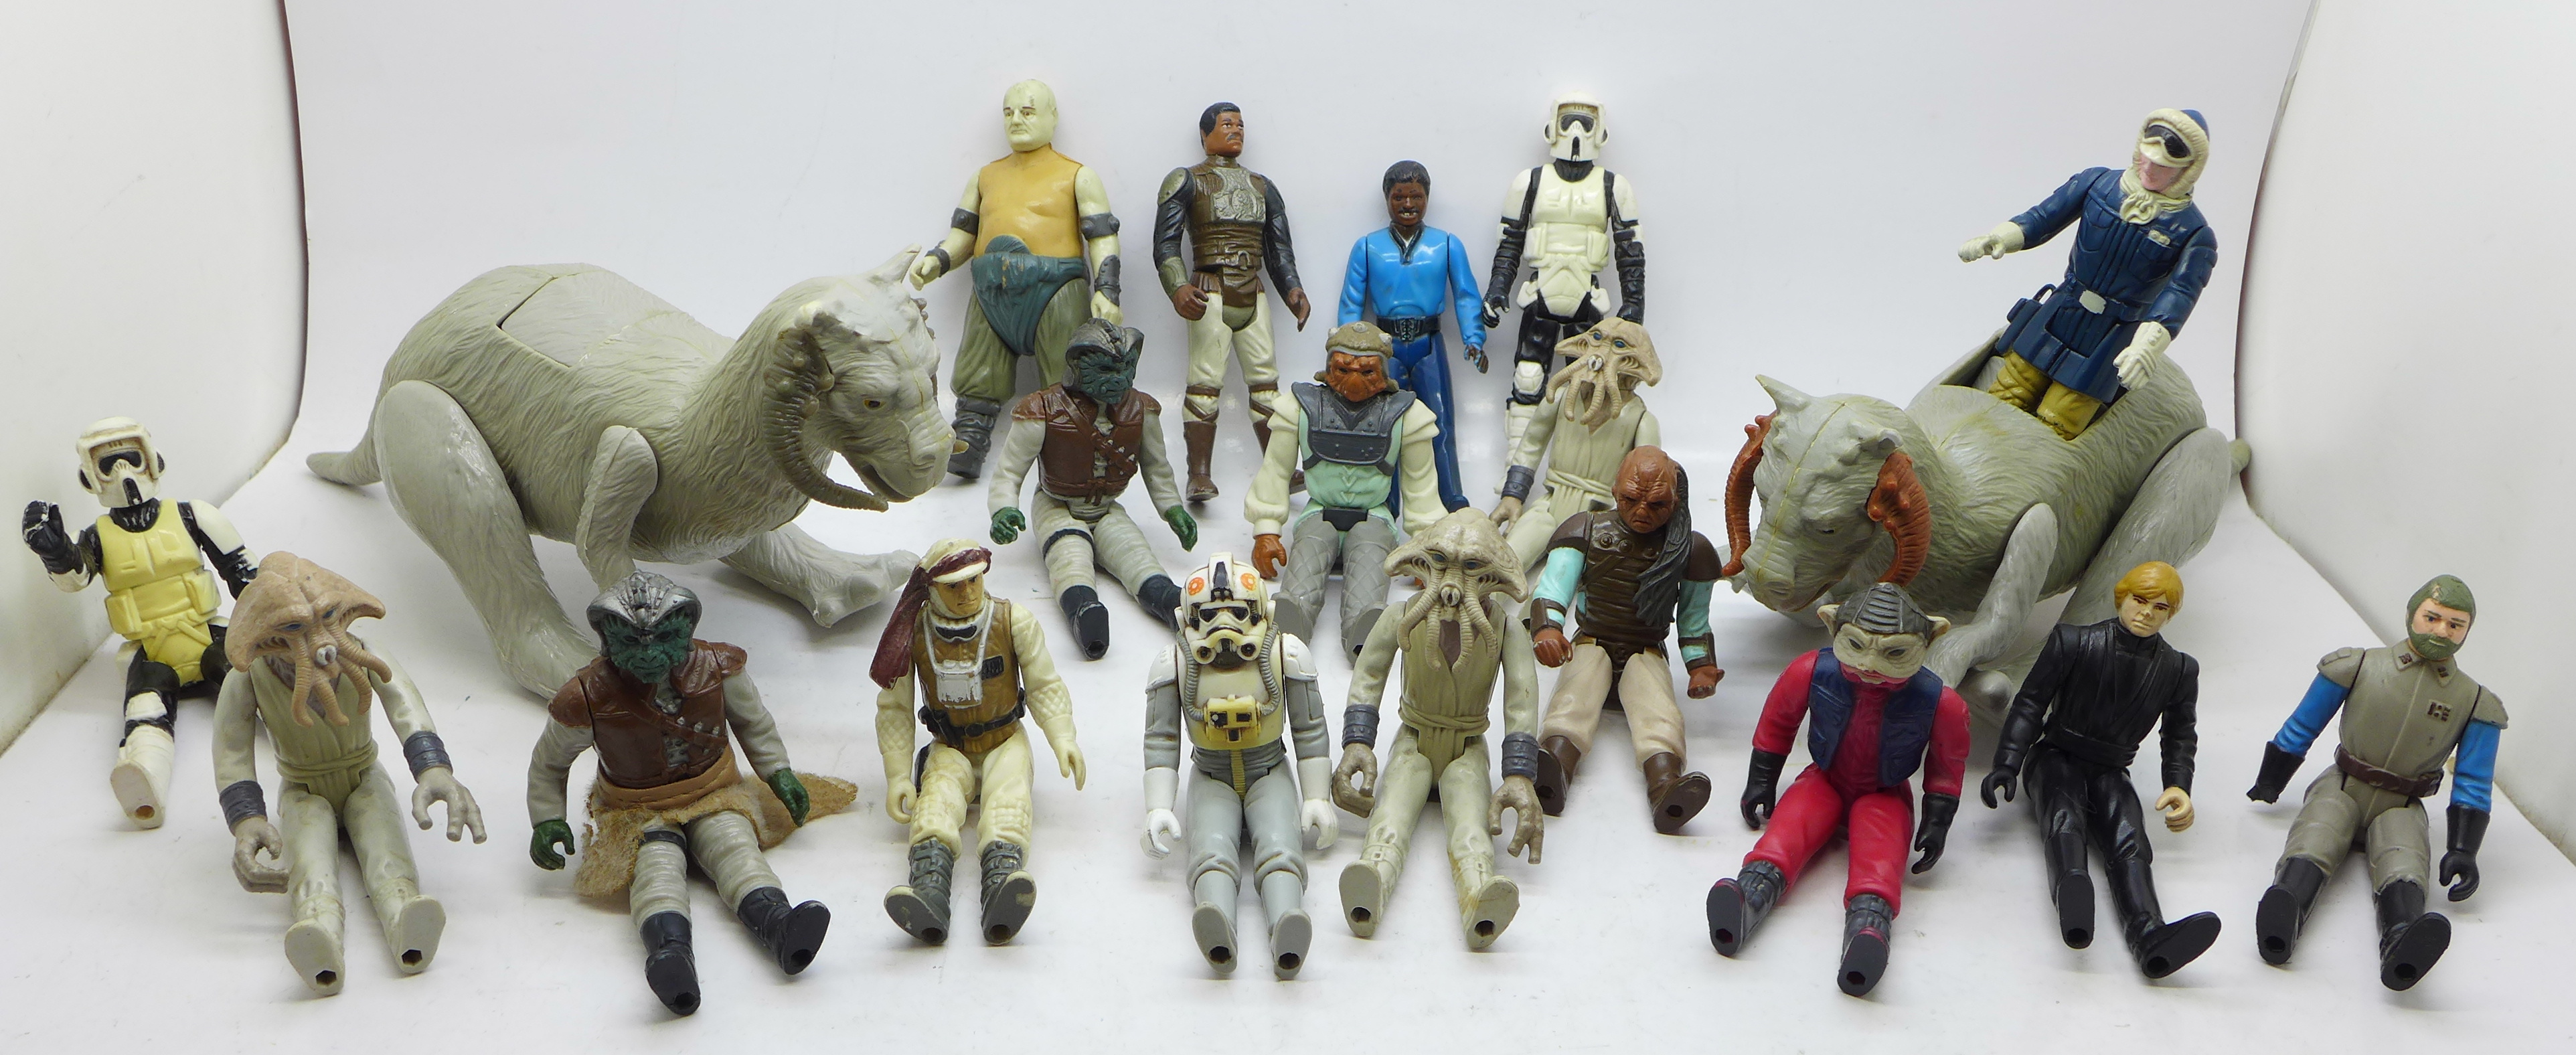 A collection of Star Wars figures